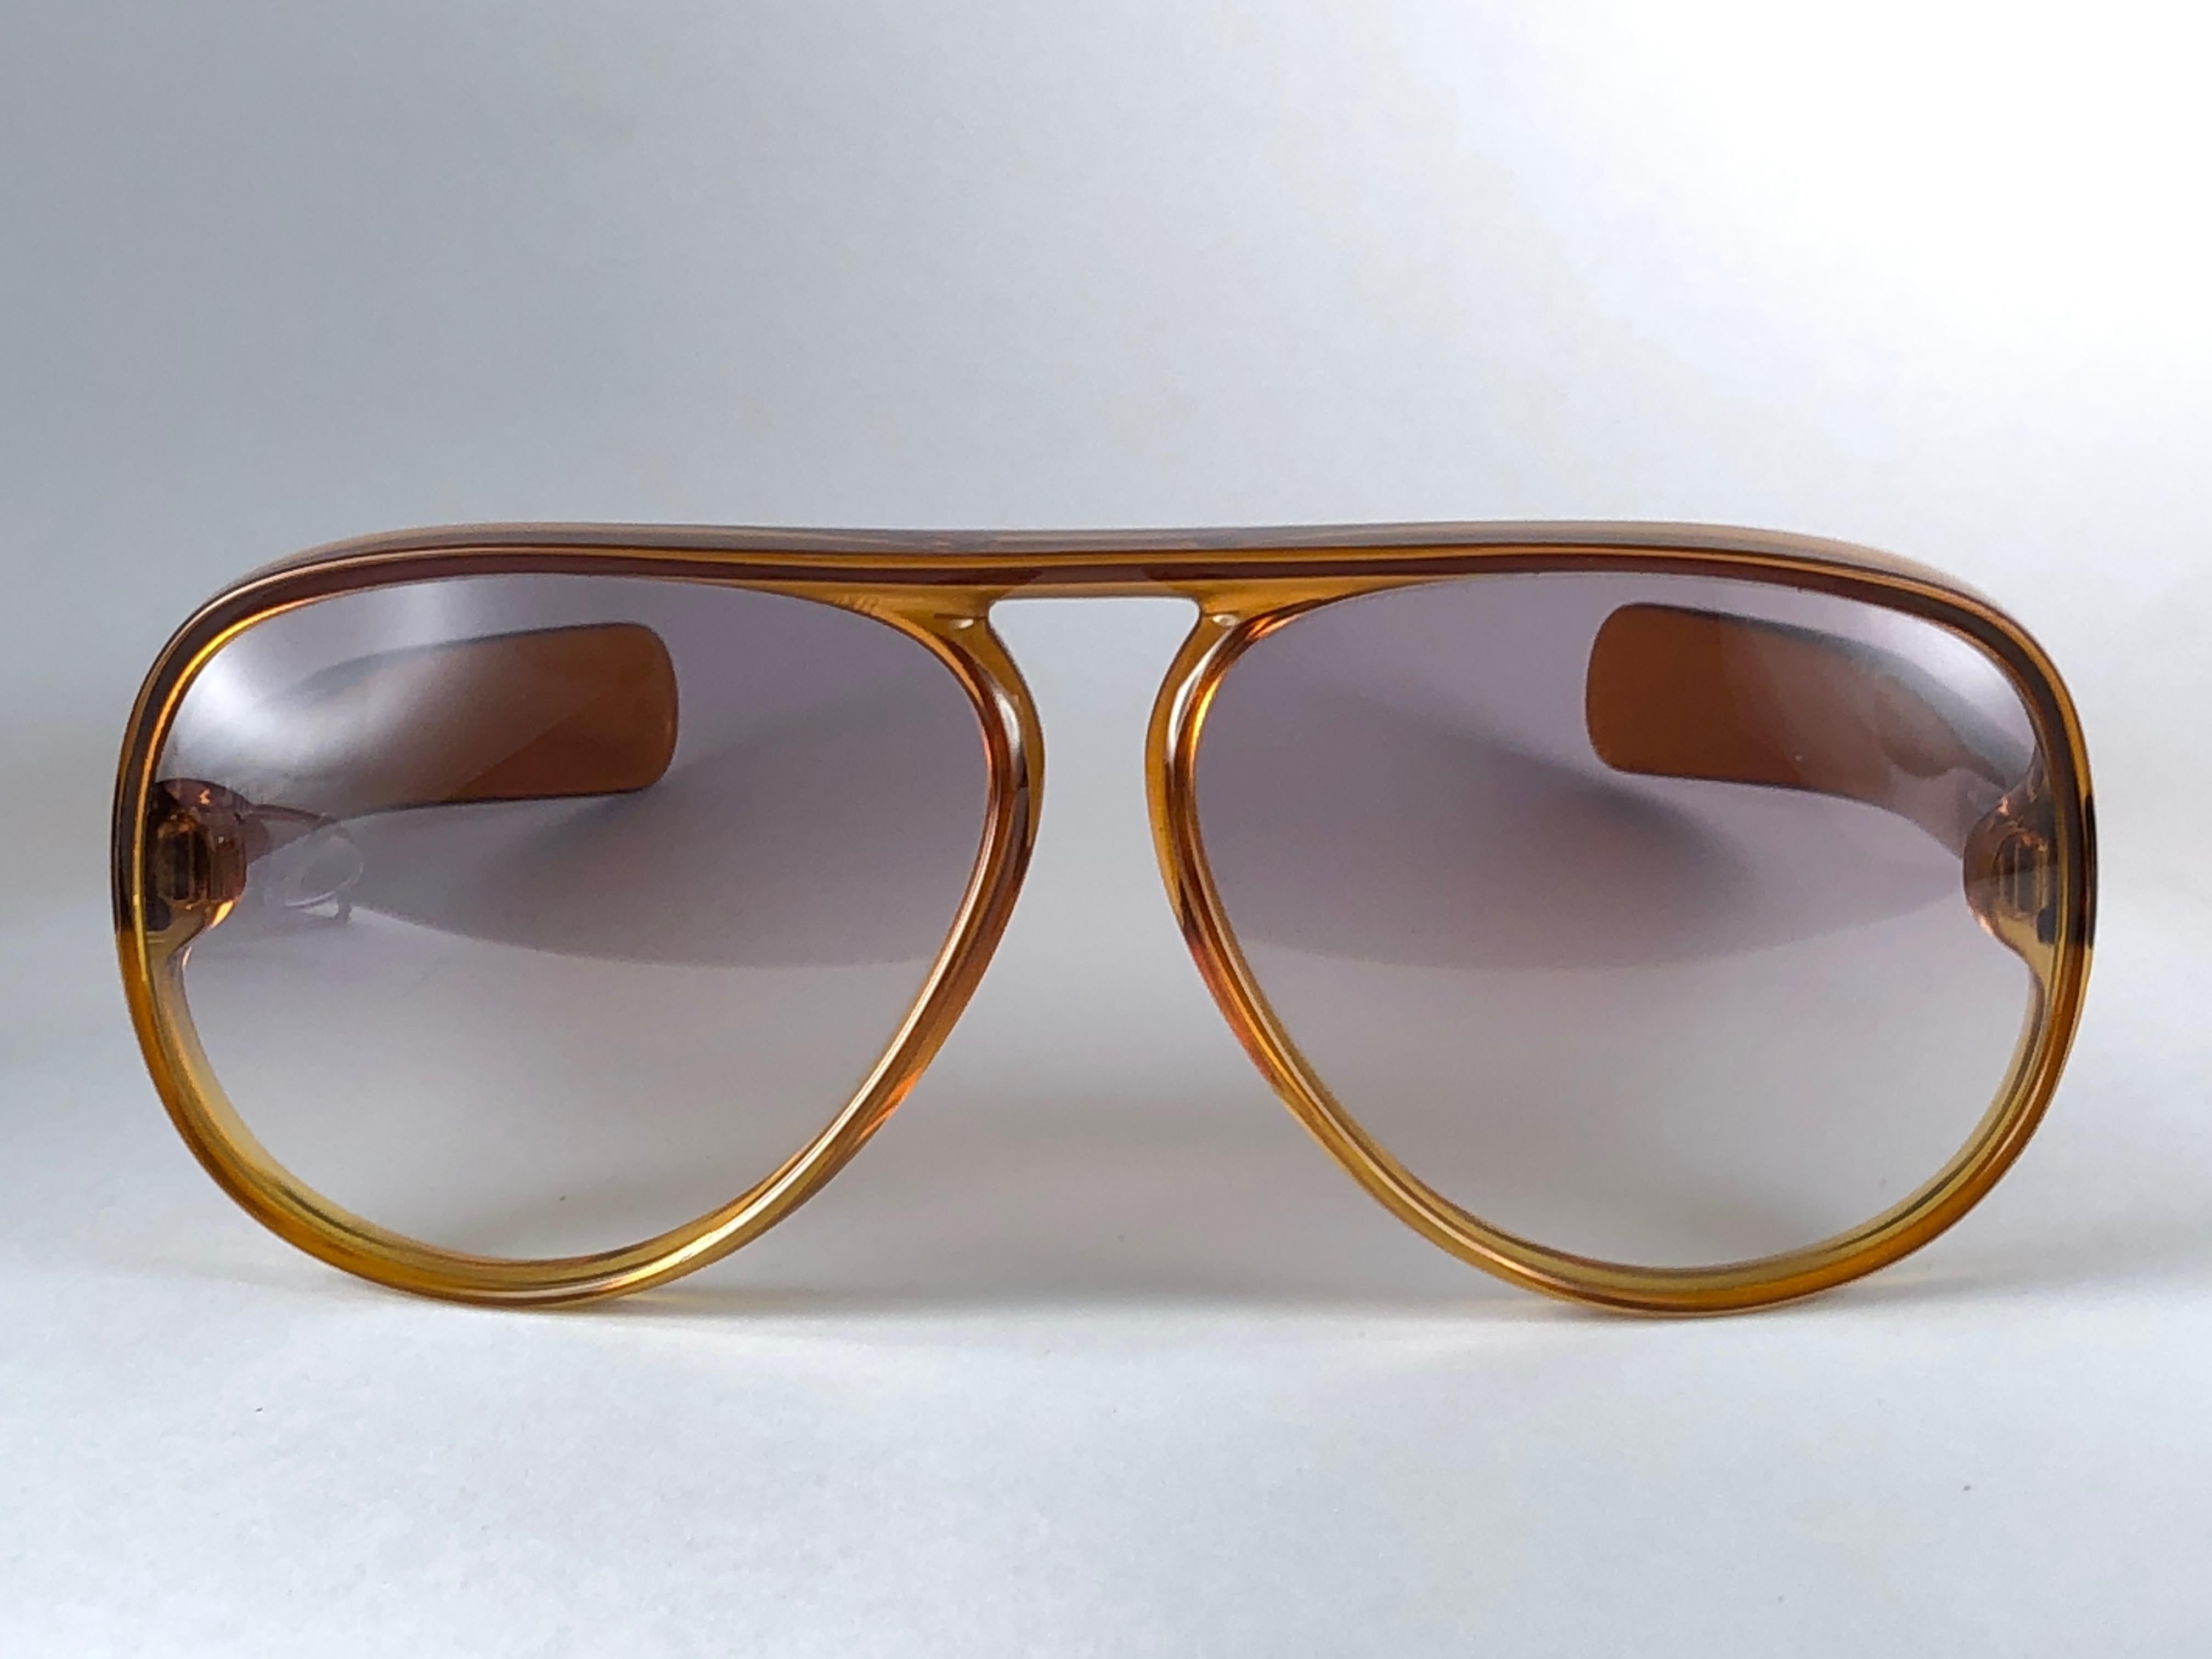 New Vintage Christian Dior D60 J10 sunglasses oversized translucent gradient honey amber aviator with spotless light brown gradient lenses 1970’s.

Made by optyl. 
Manufactured in austria
 
Strong and stunning oversized frame. A must have piece!